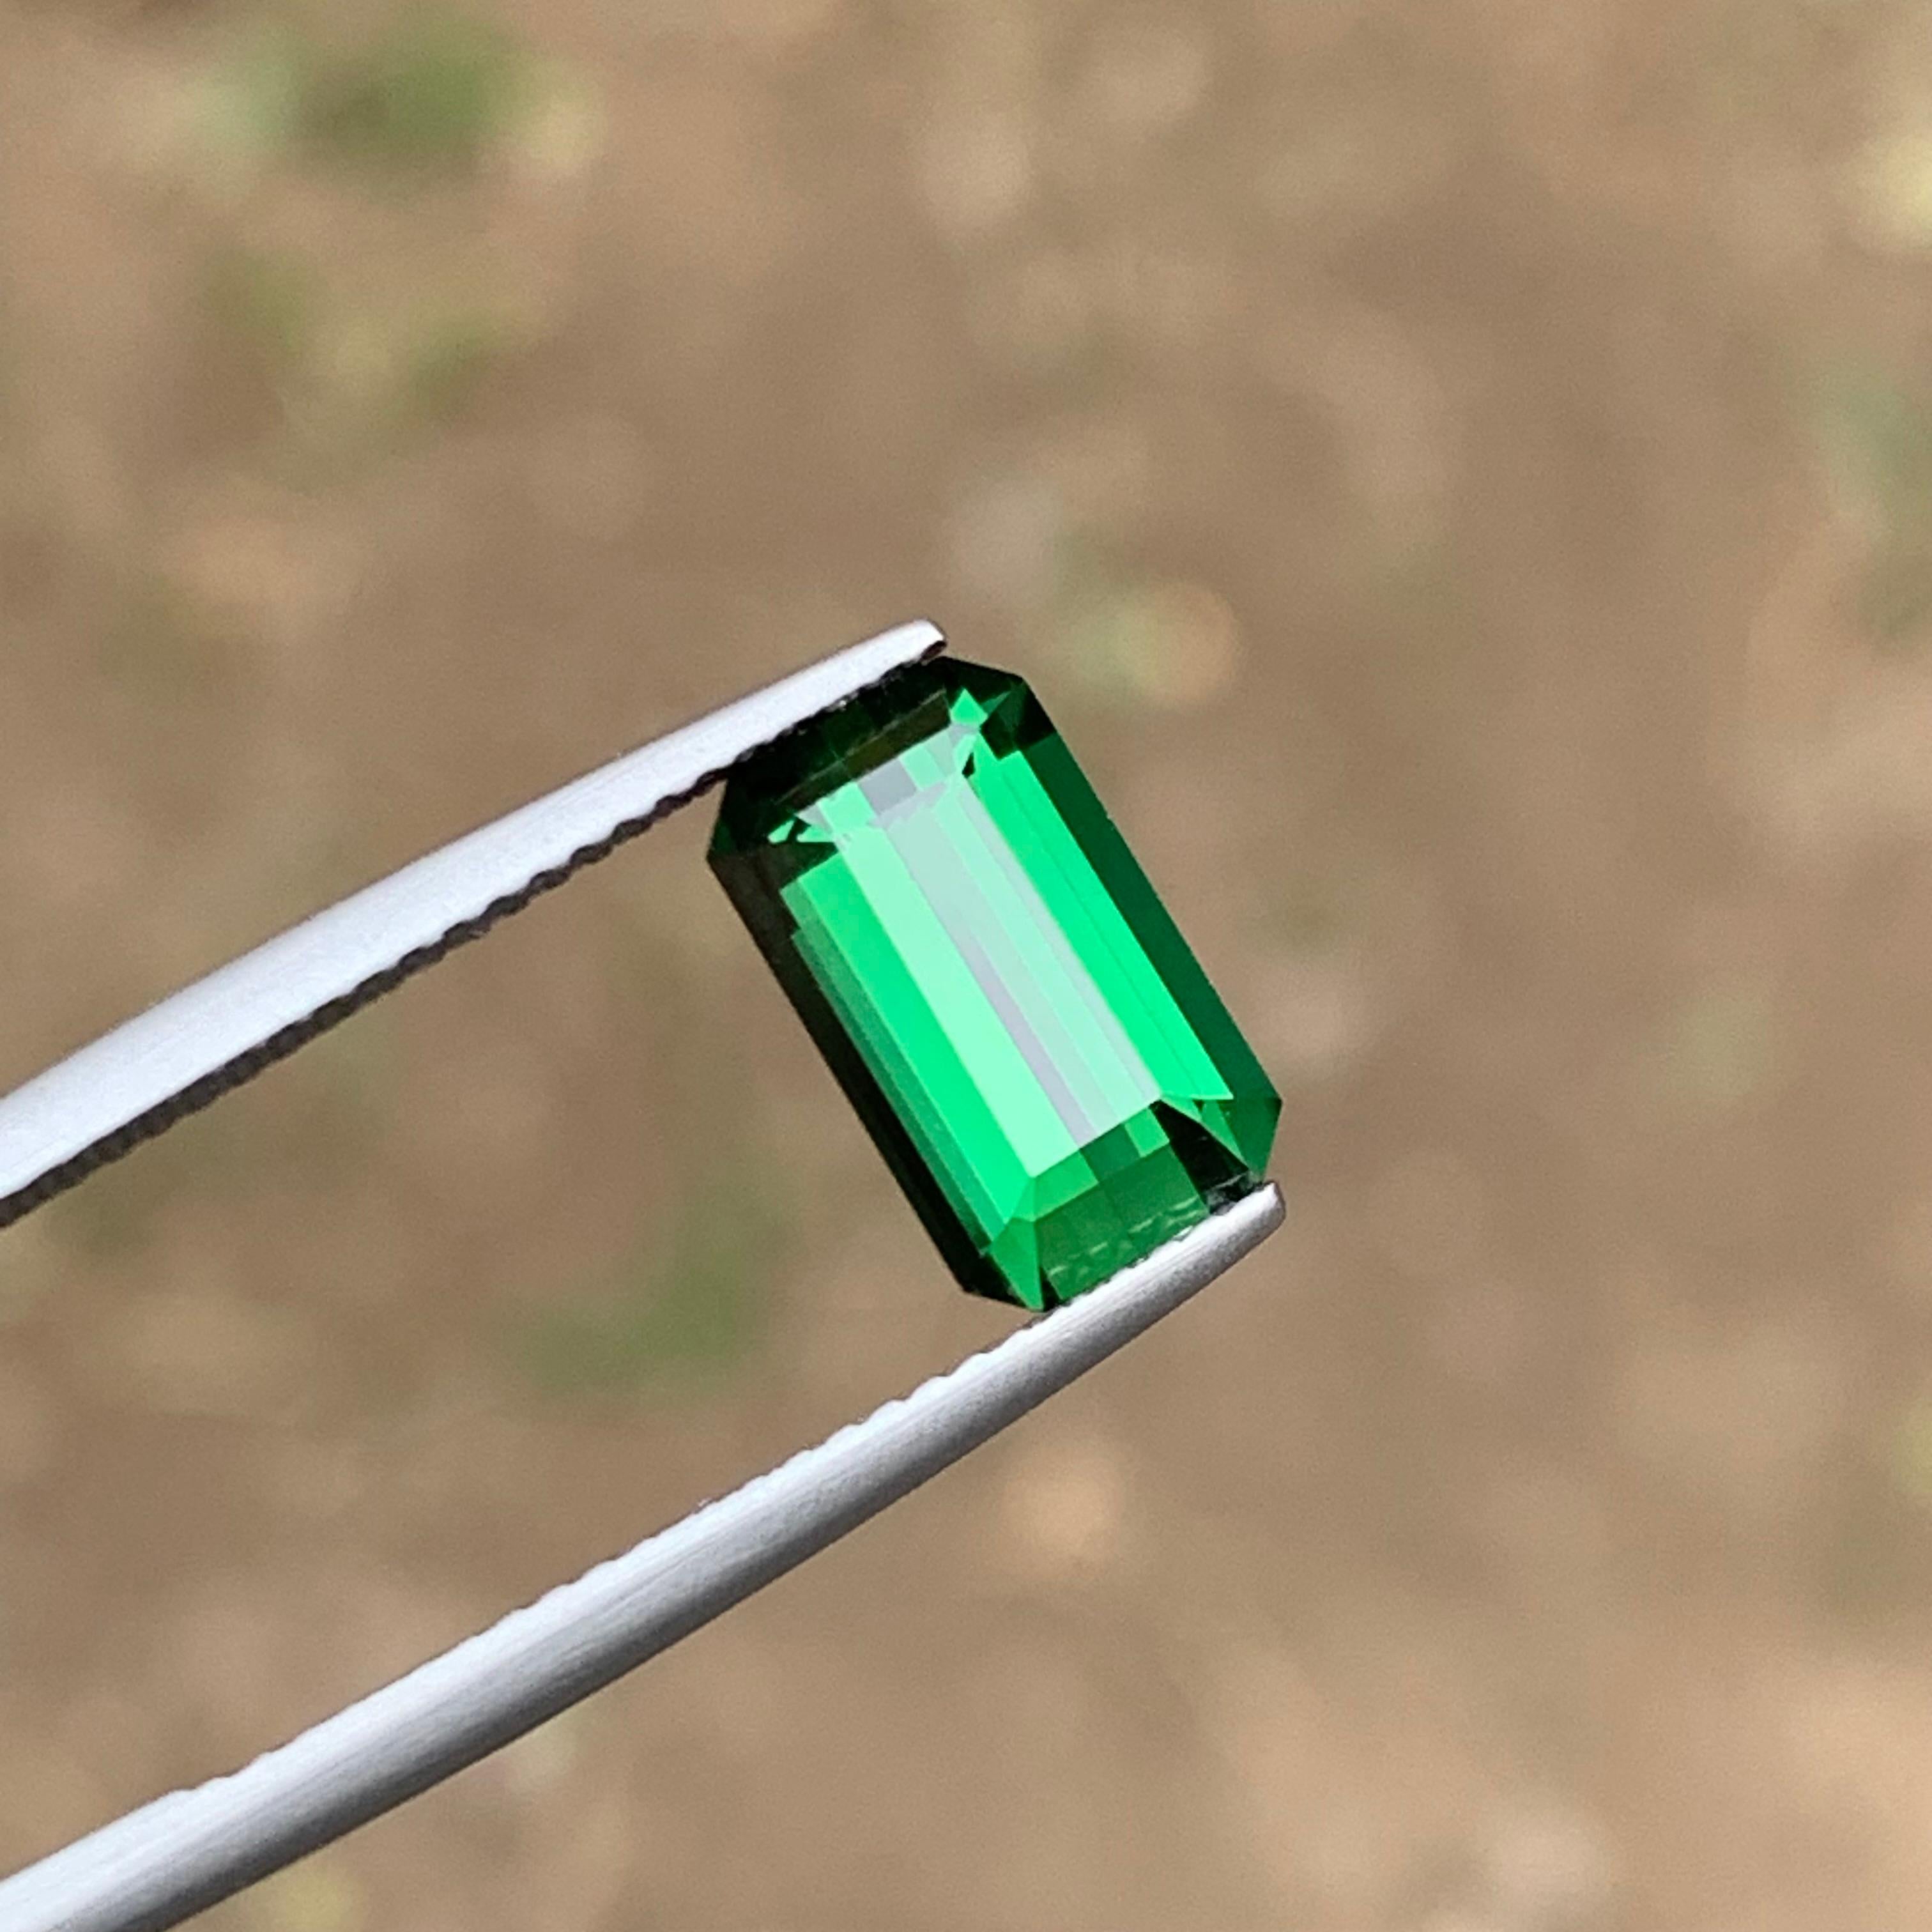 Rare Deep Green Natural Tourmaline Gemstone 2.95 Ct Emerald Cut for Ring/Pendant For Sale 1